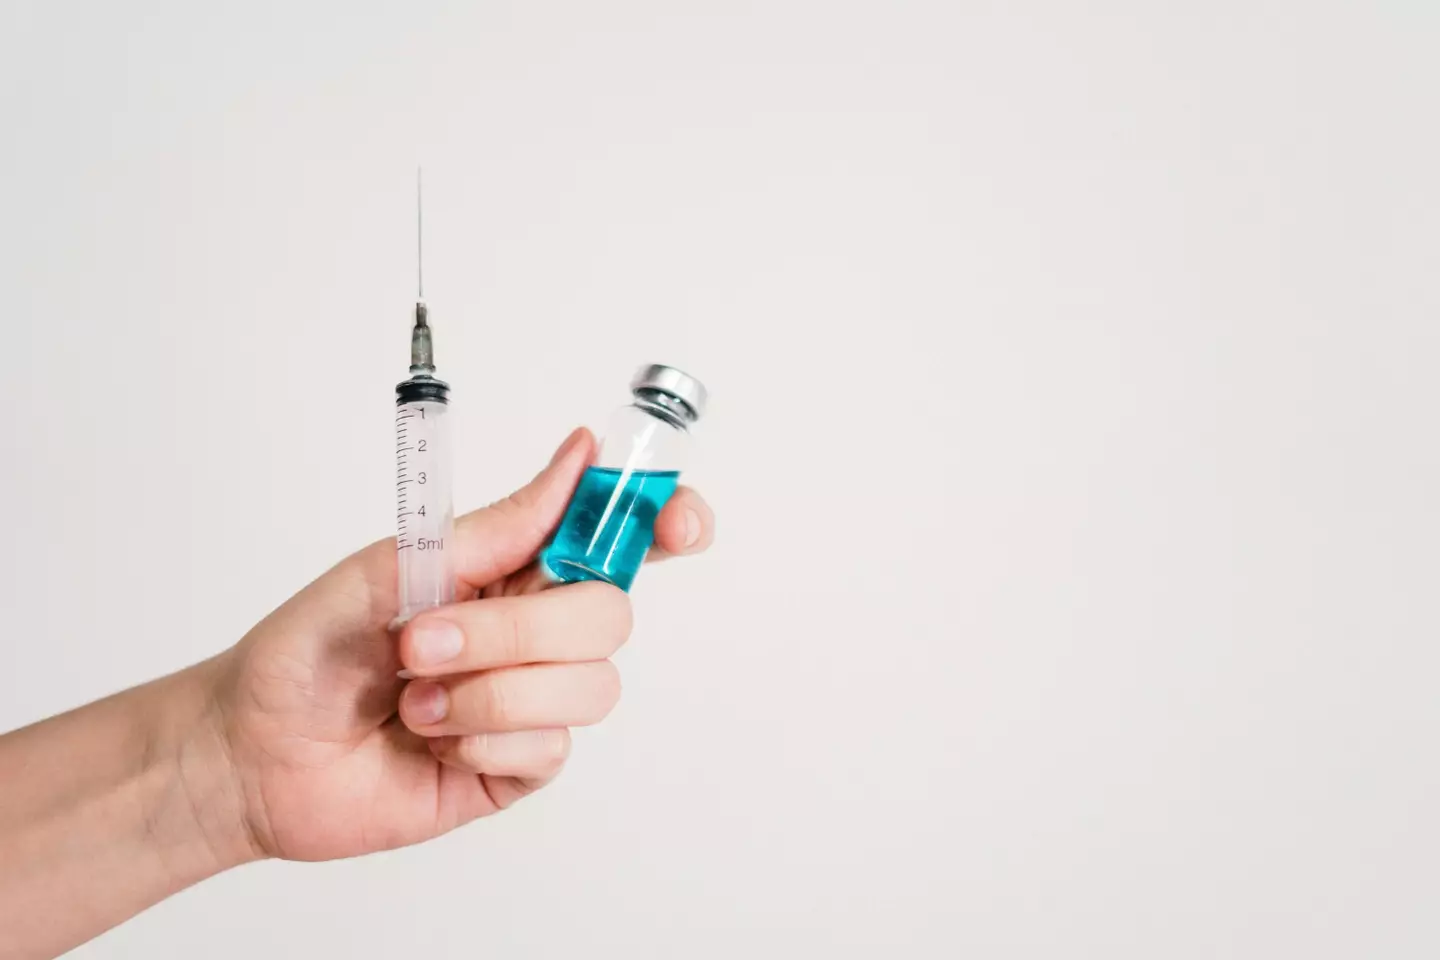 New research has revealed people who inject steroids are 10x more likely to have hep C.